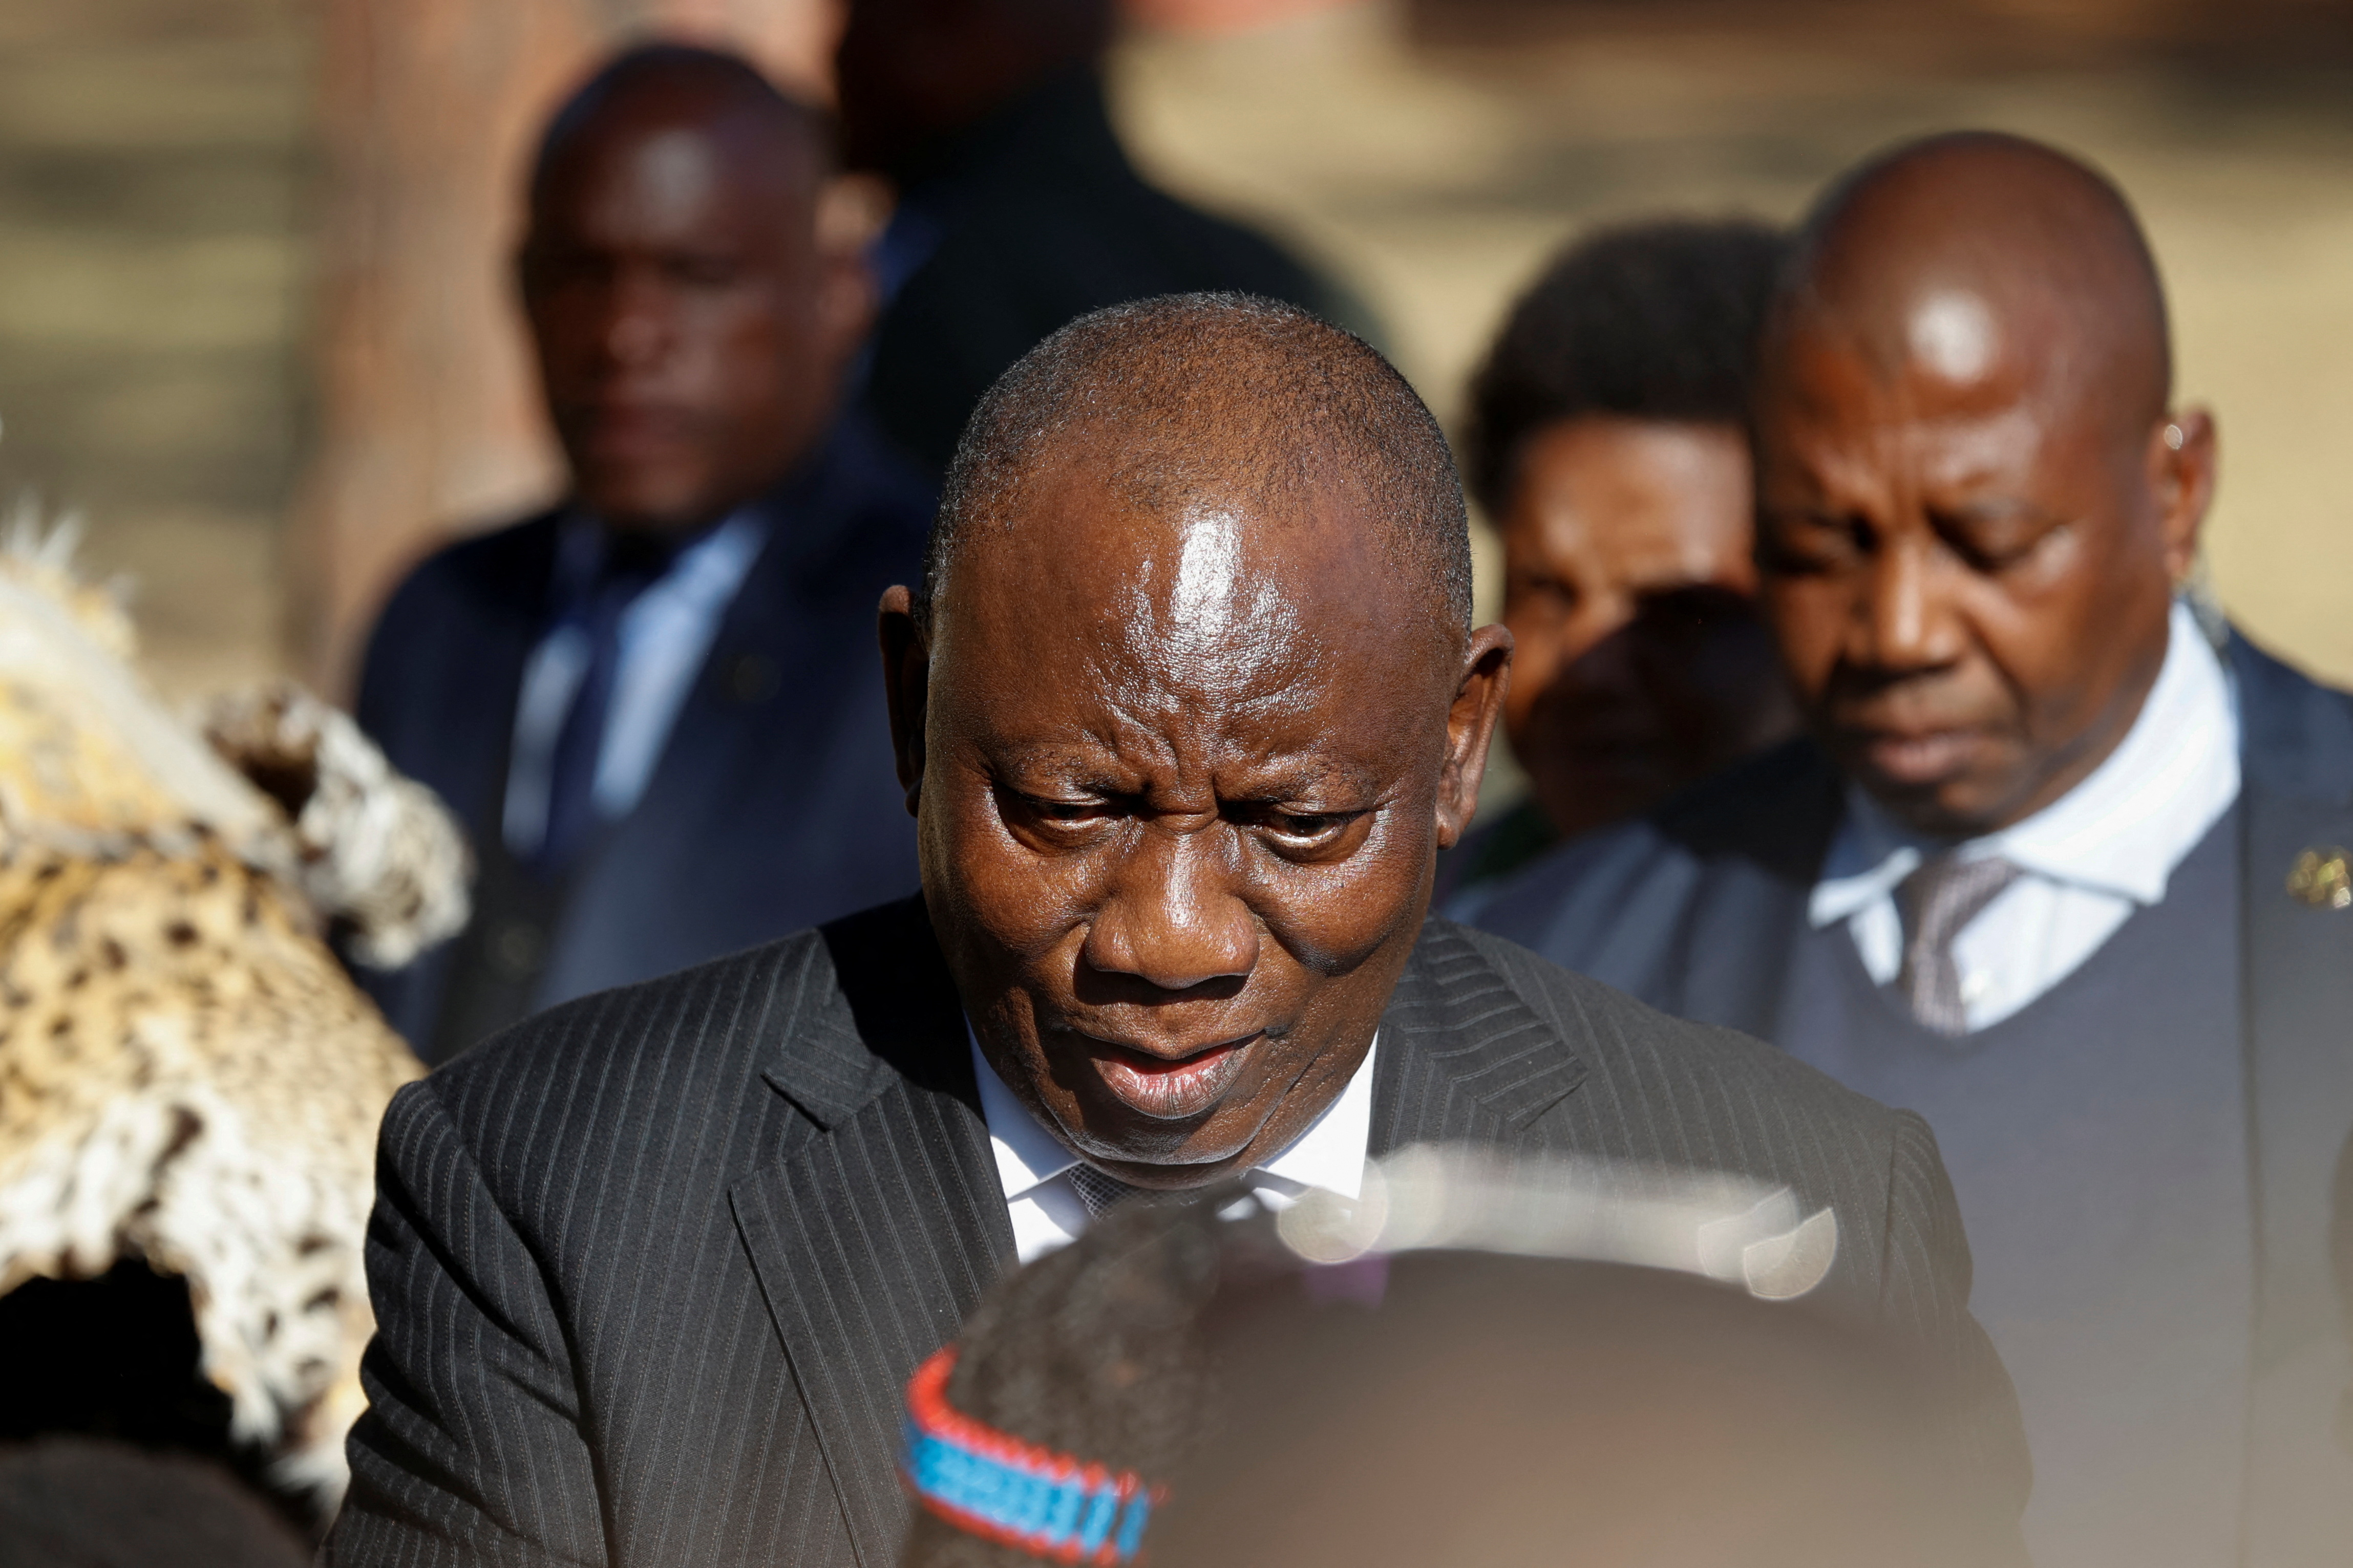 Inauguration of South Africa's president-elect Ramaphosa, in Pretoria